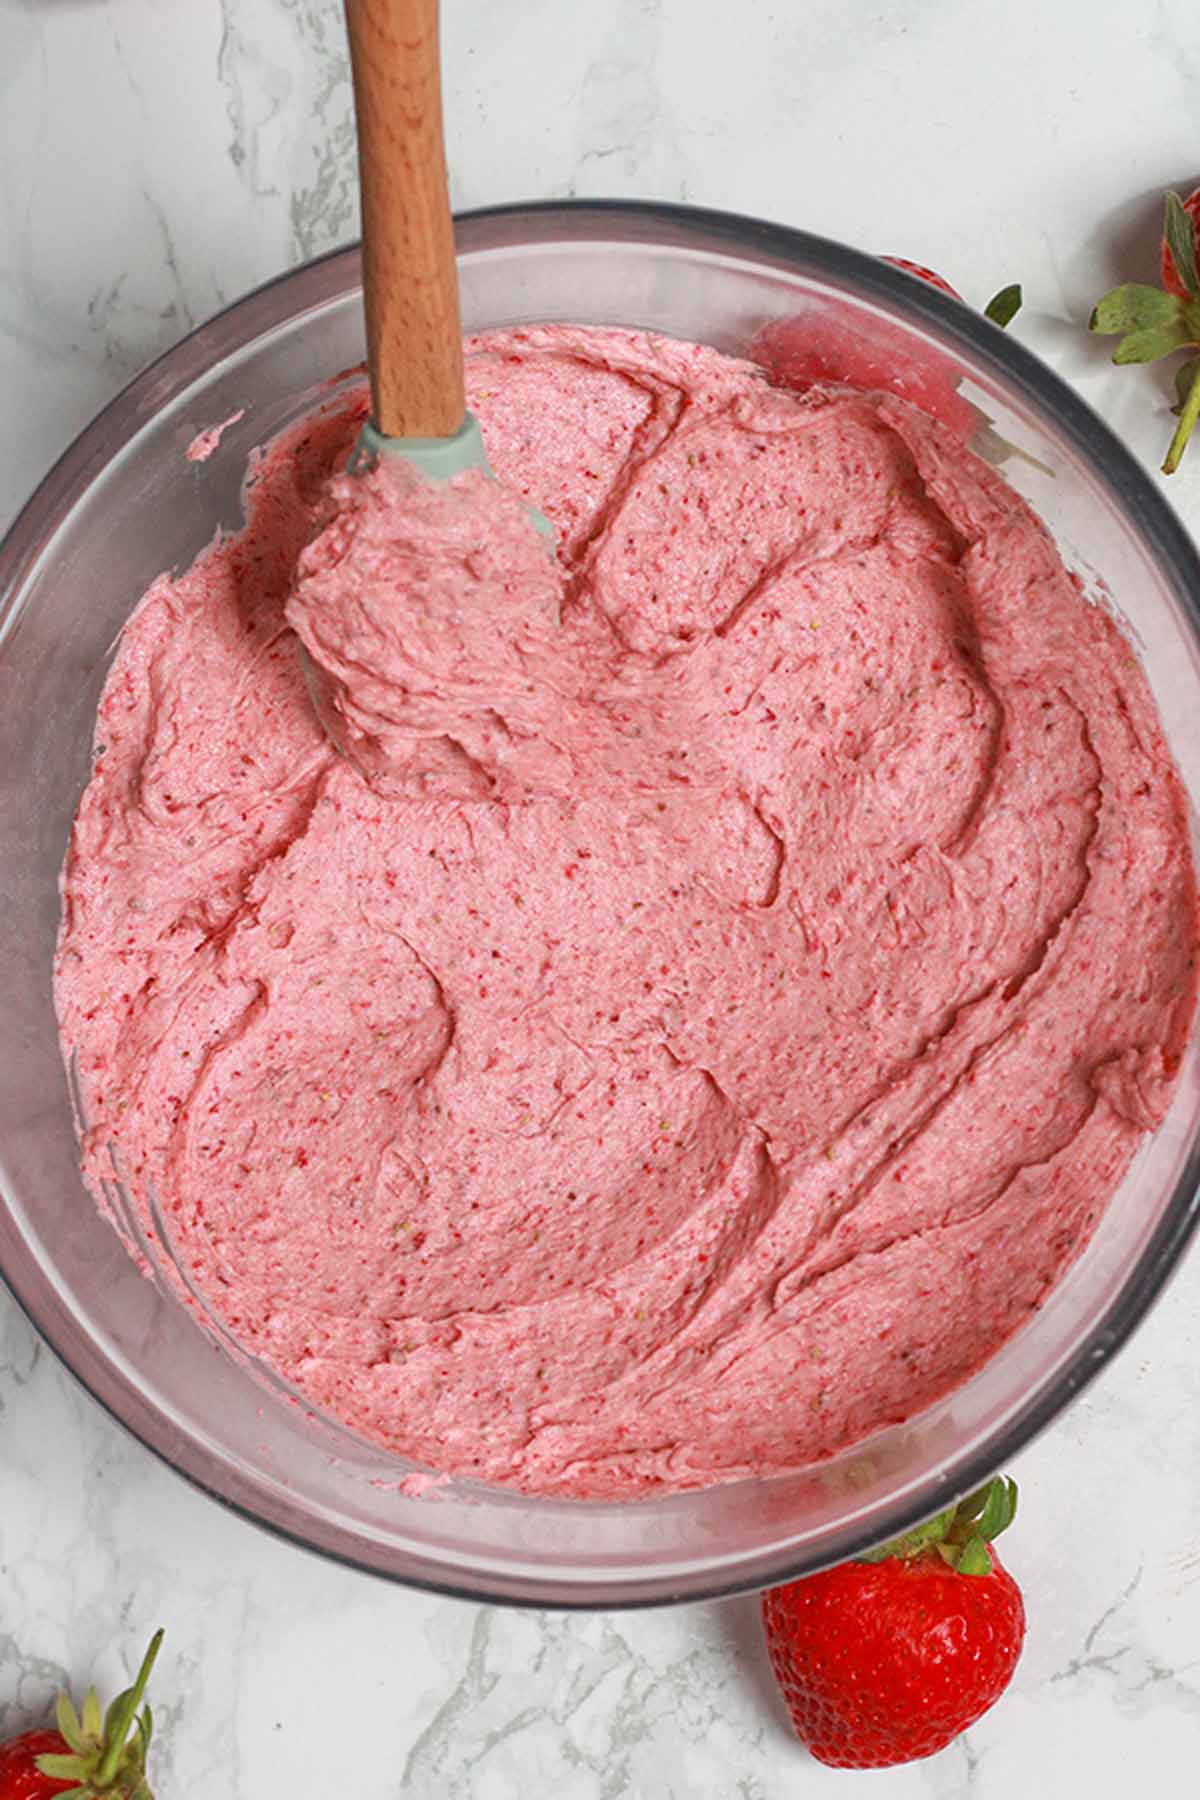 Vegan frosting with strawberry powder as a natural food colouring